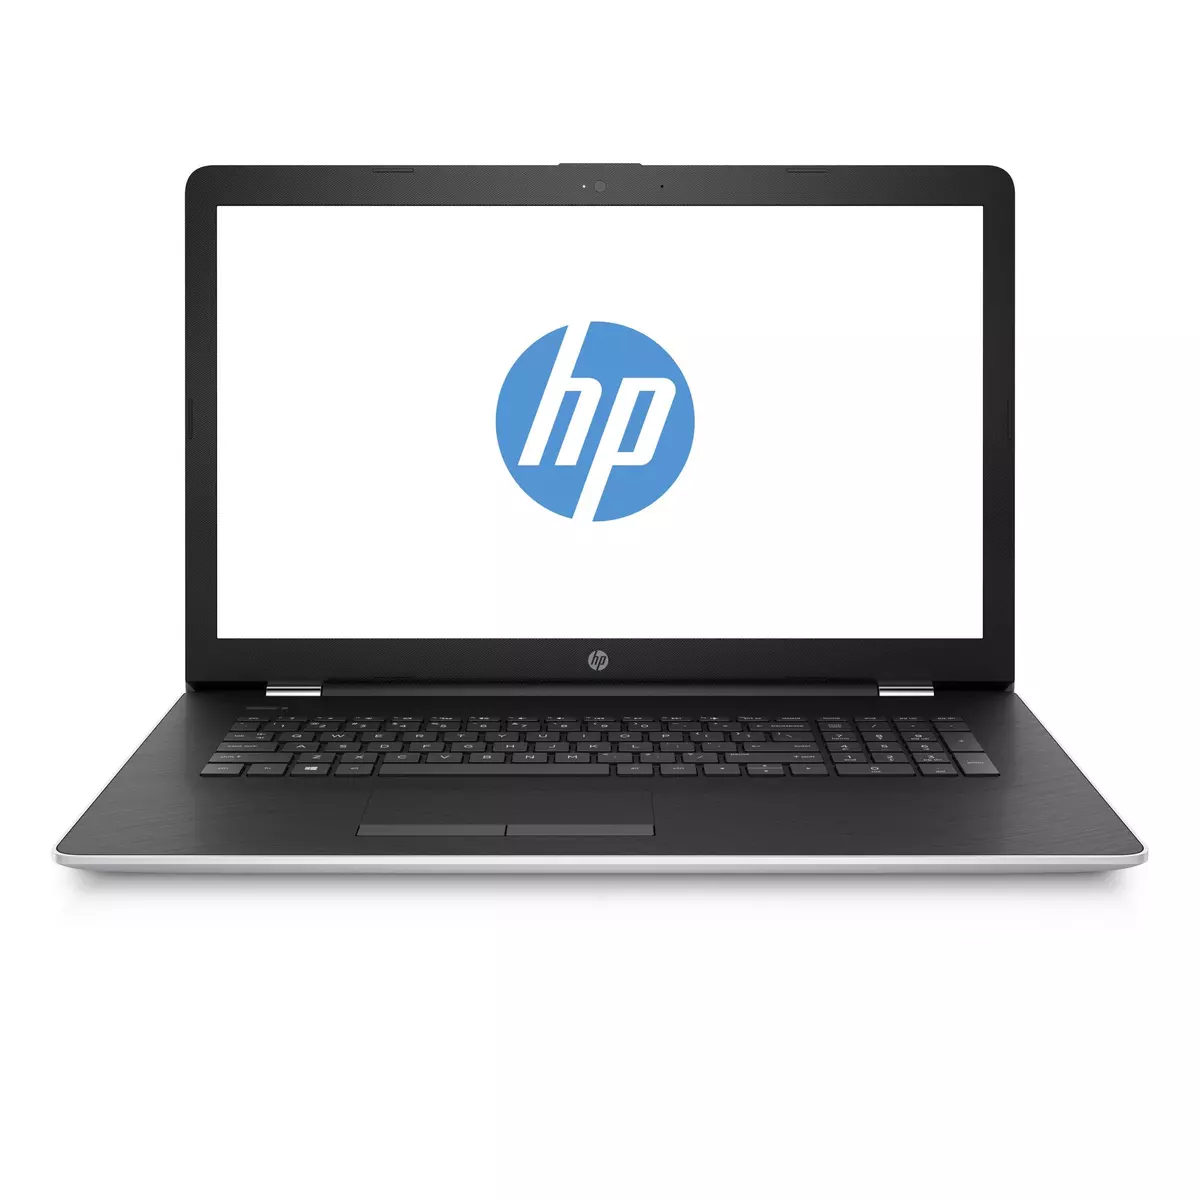 HP Ordinateur portable Notebook 17-bs065nf - 1 To - Argent